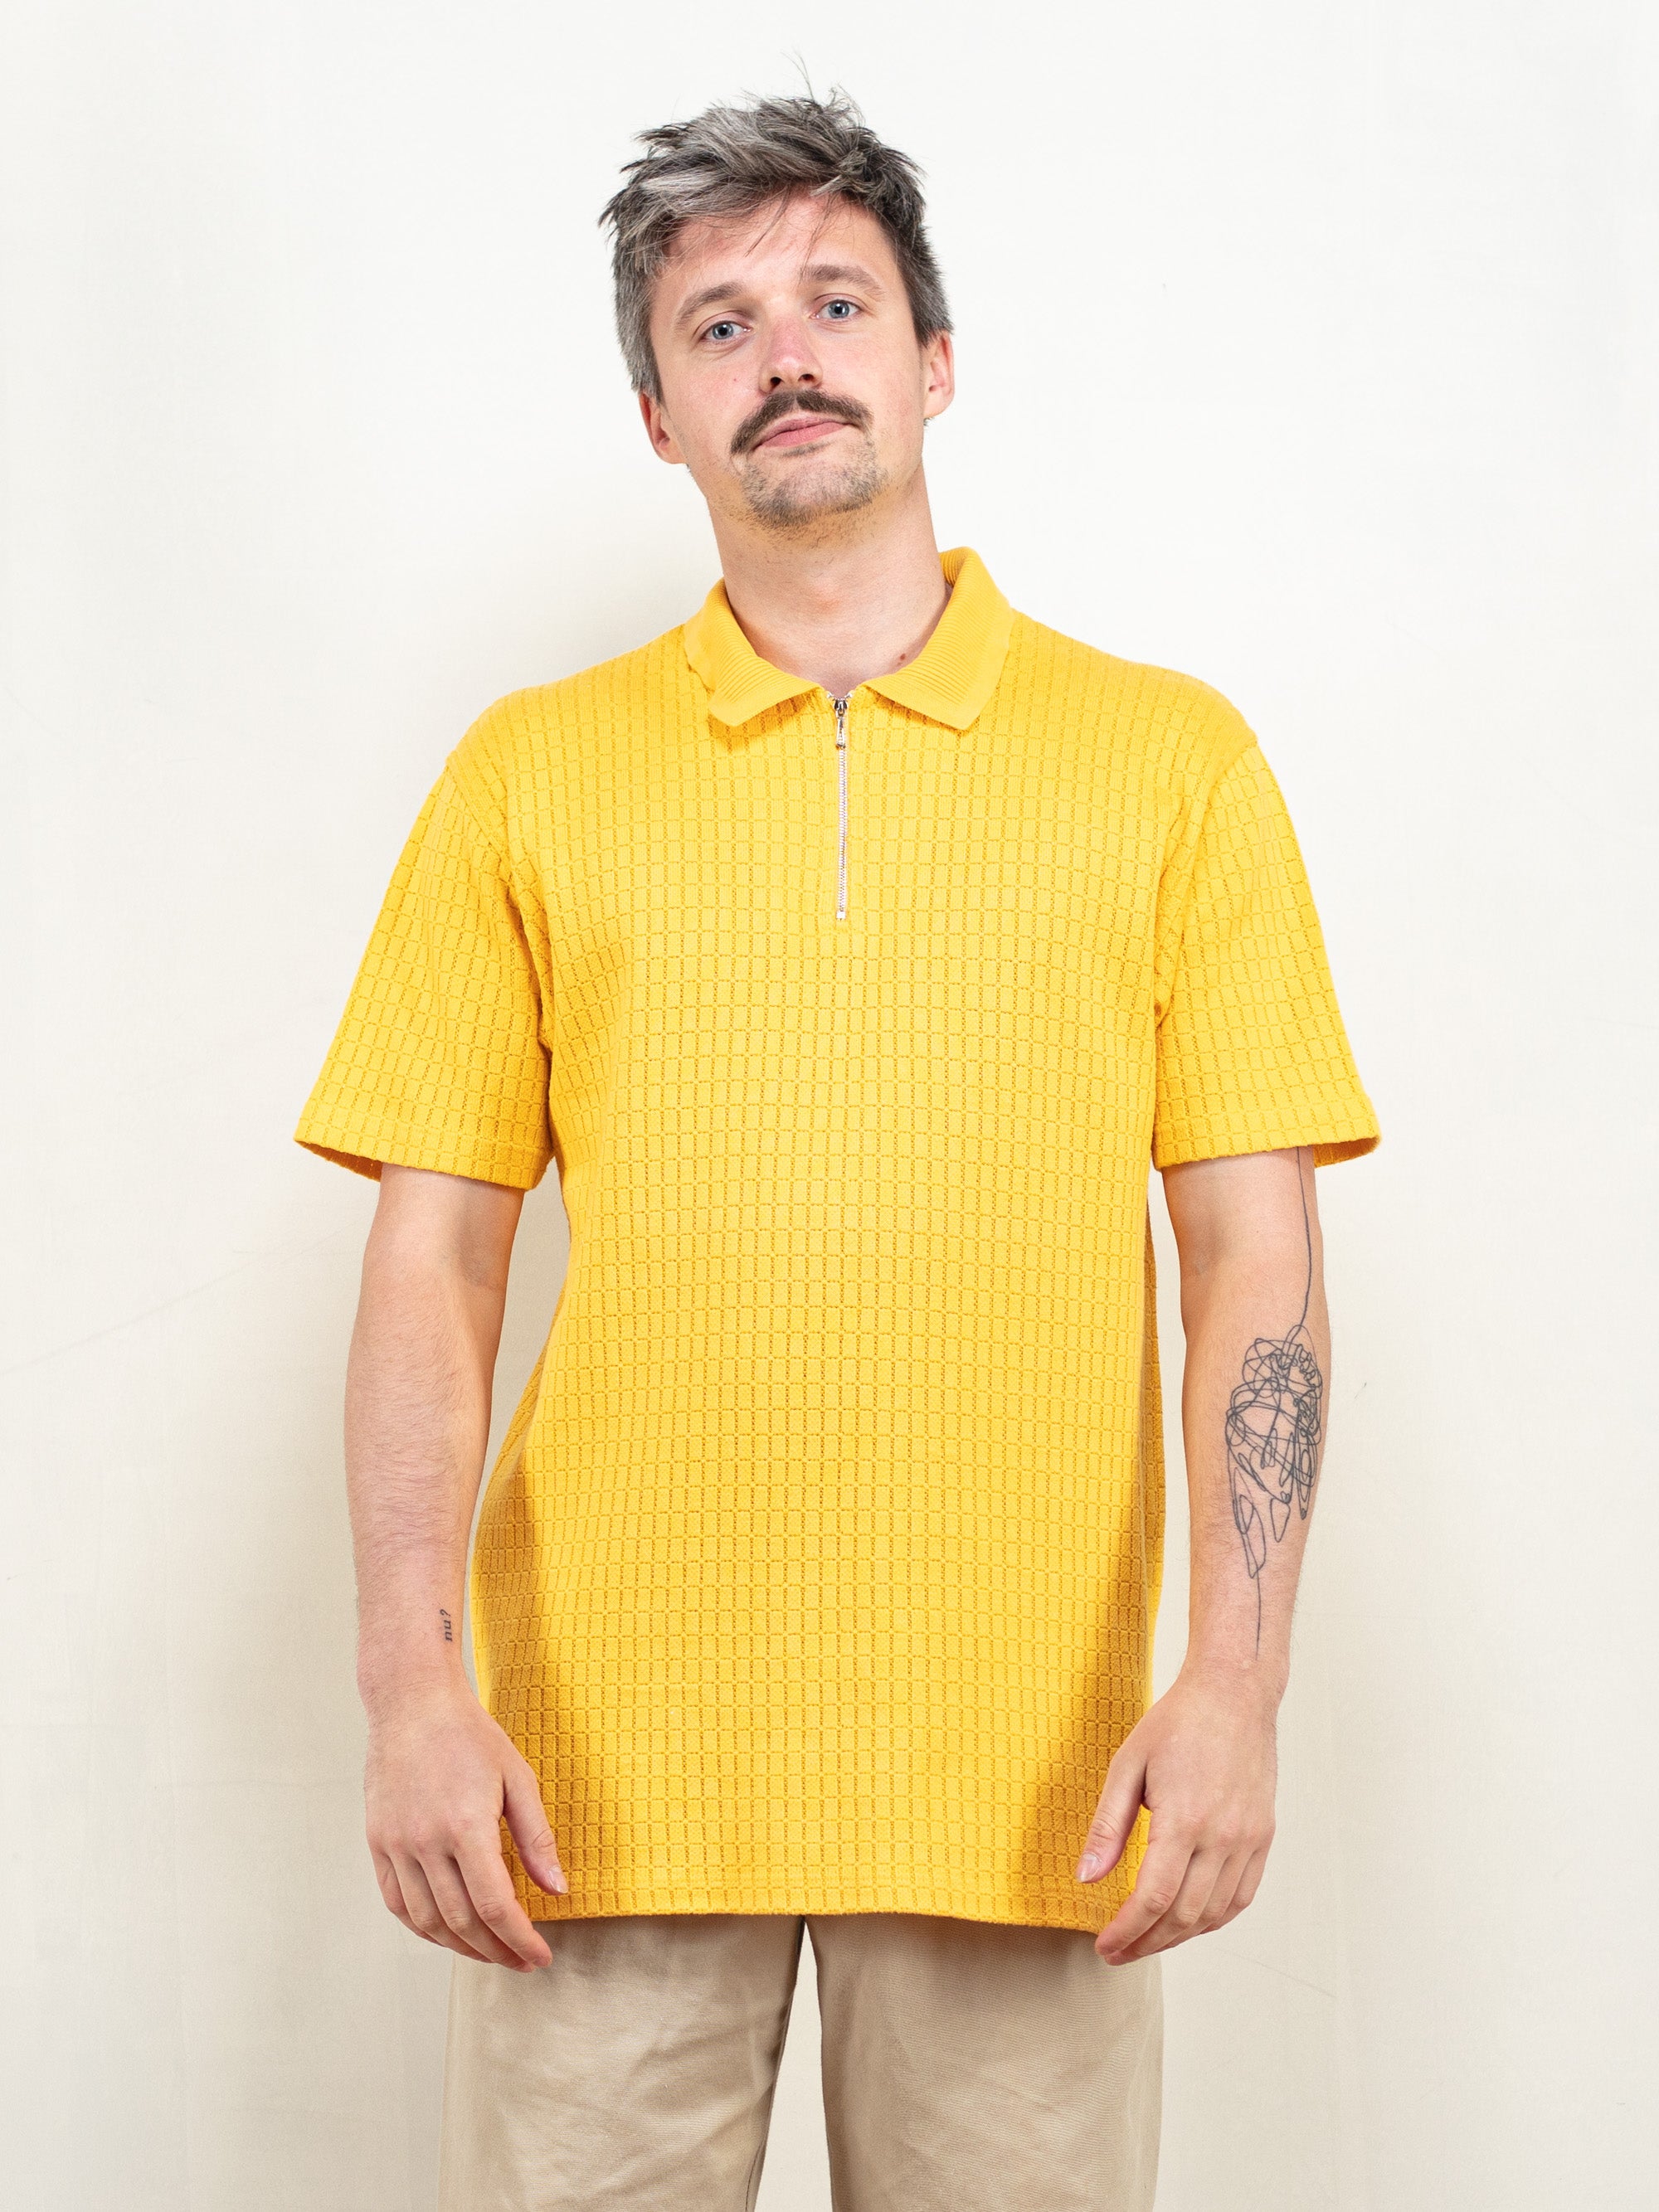 Online Vintage Store | 80's Men Polo Shirt | Northern Grip 